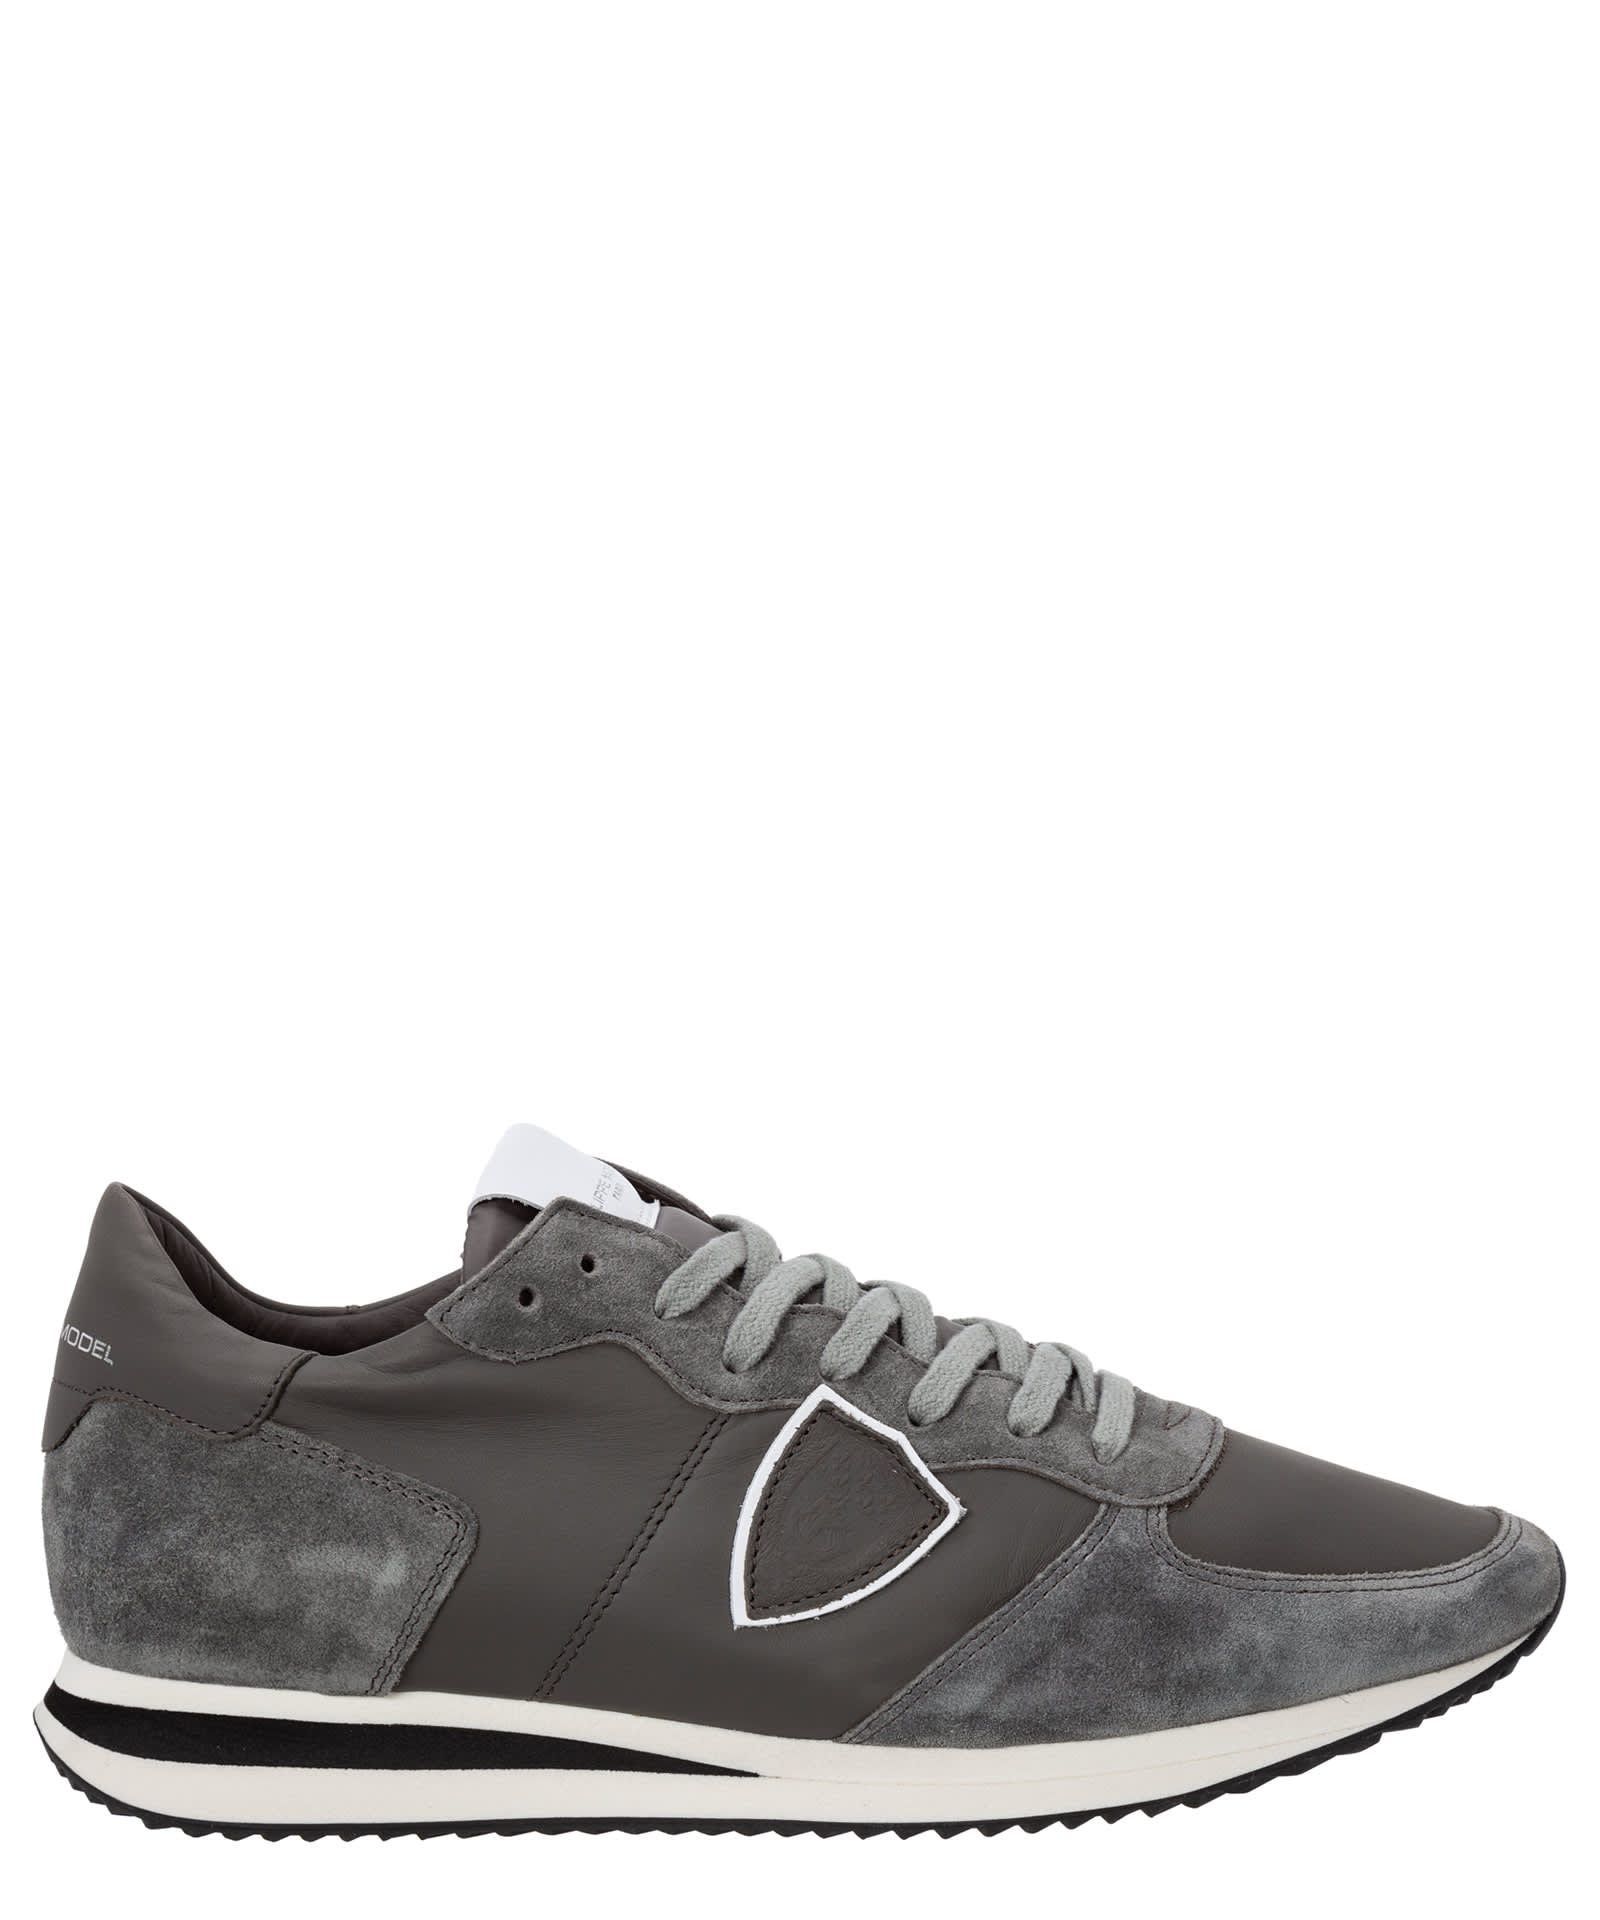 PHILIPPE MODEL TRPX LEATHER SNEAKERS